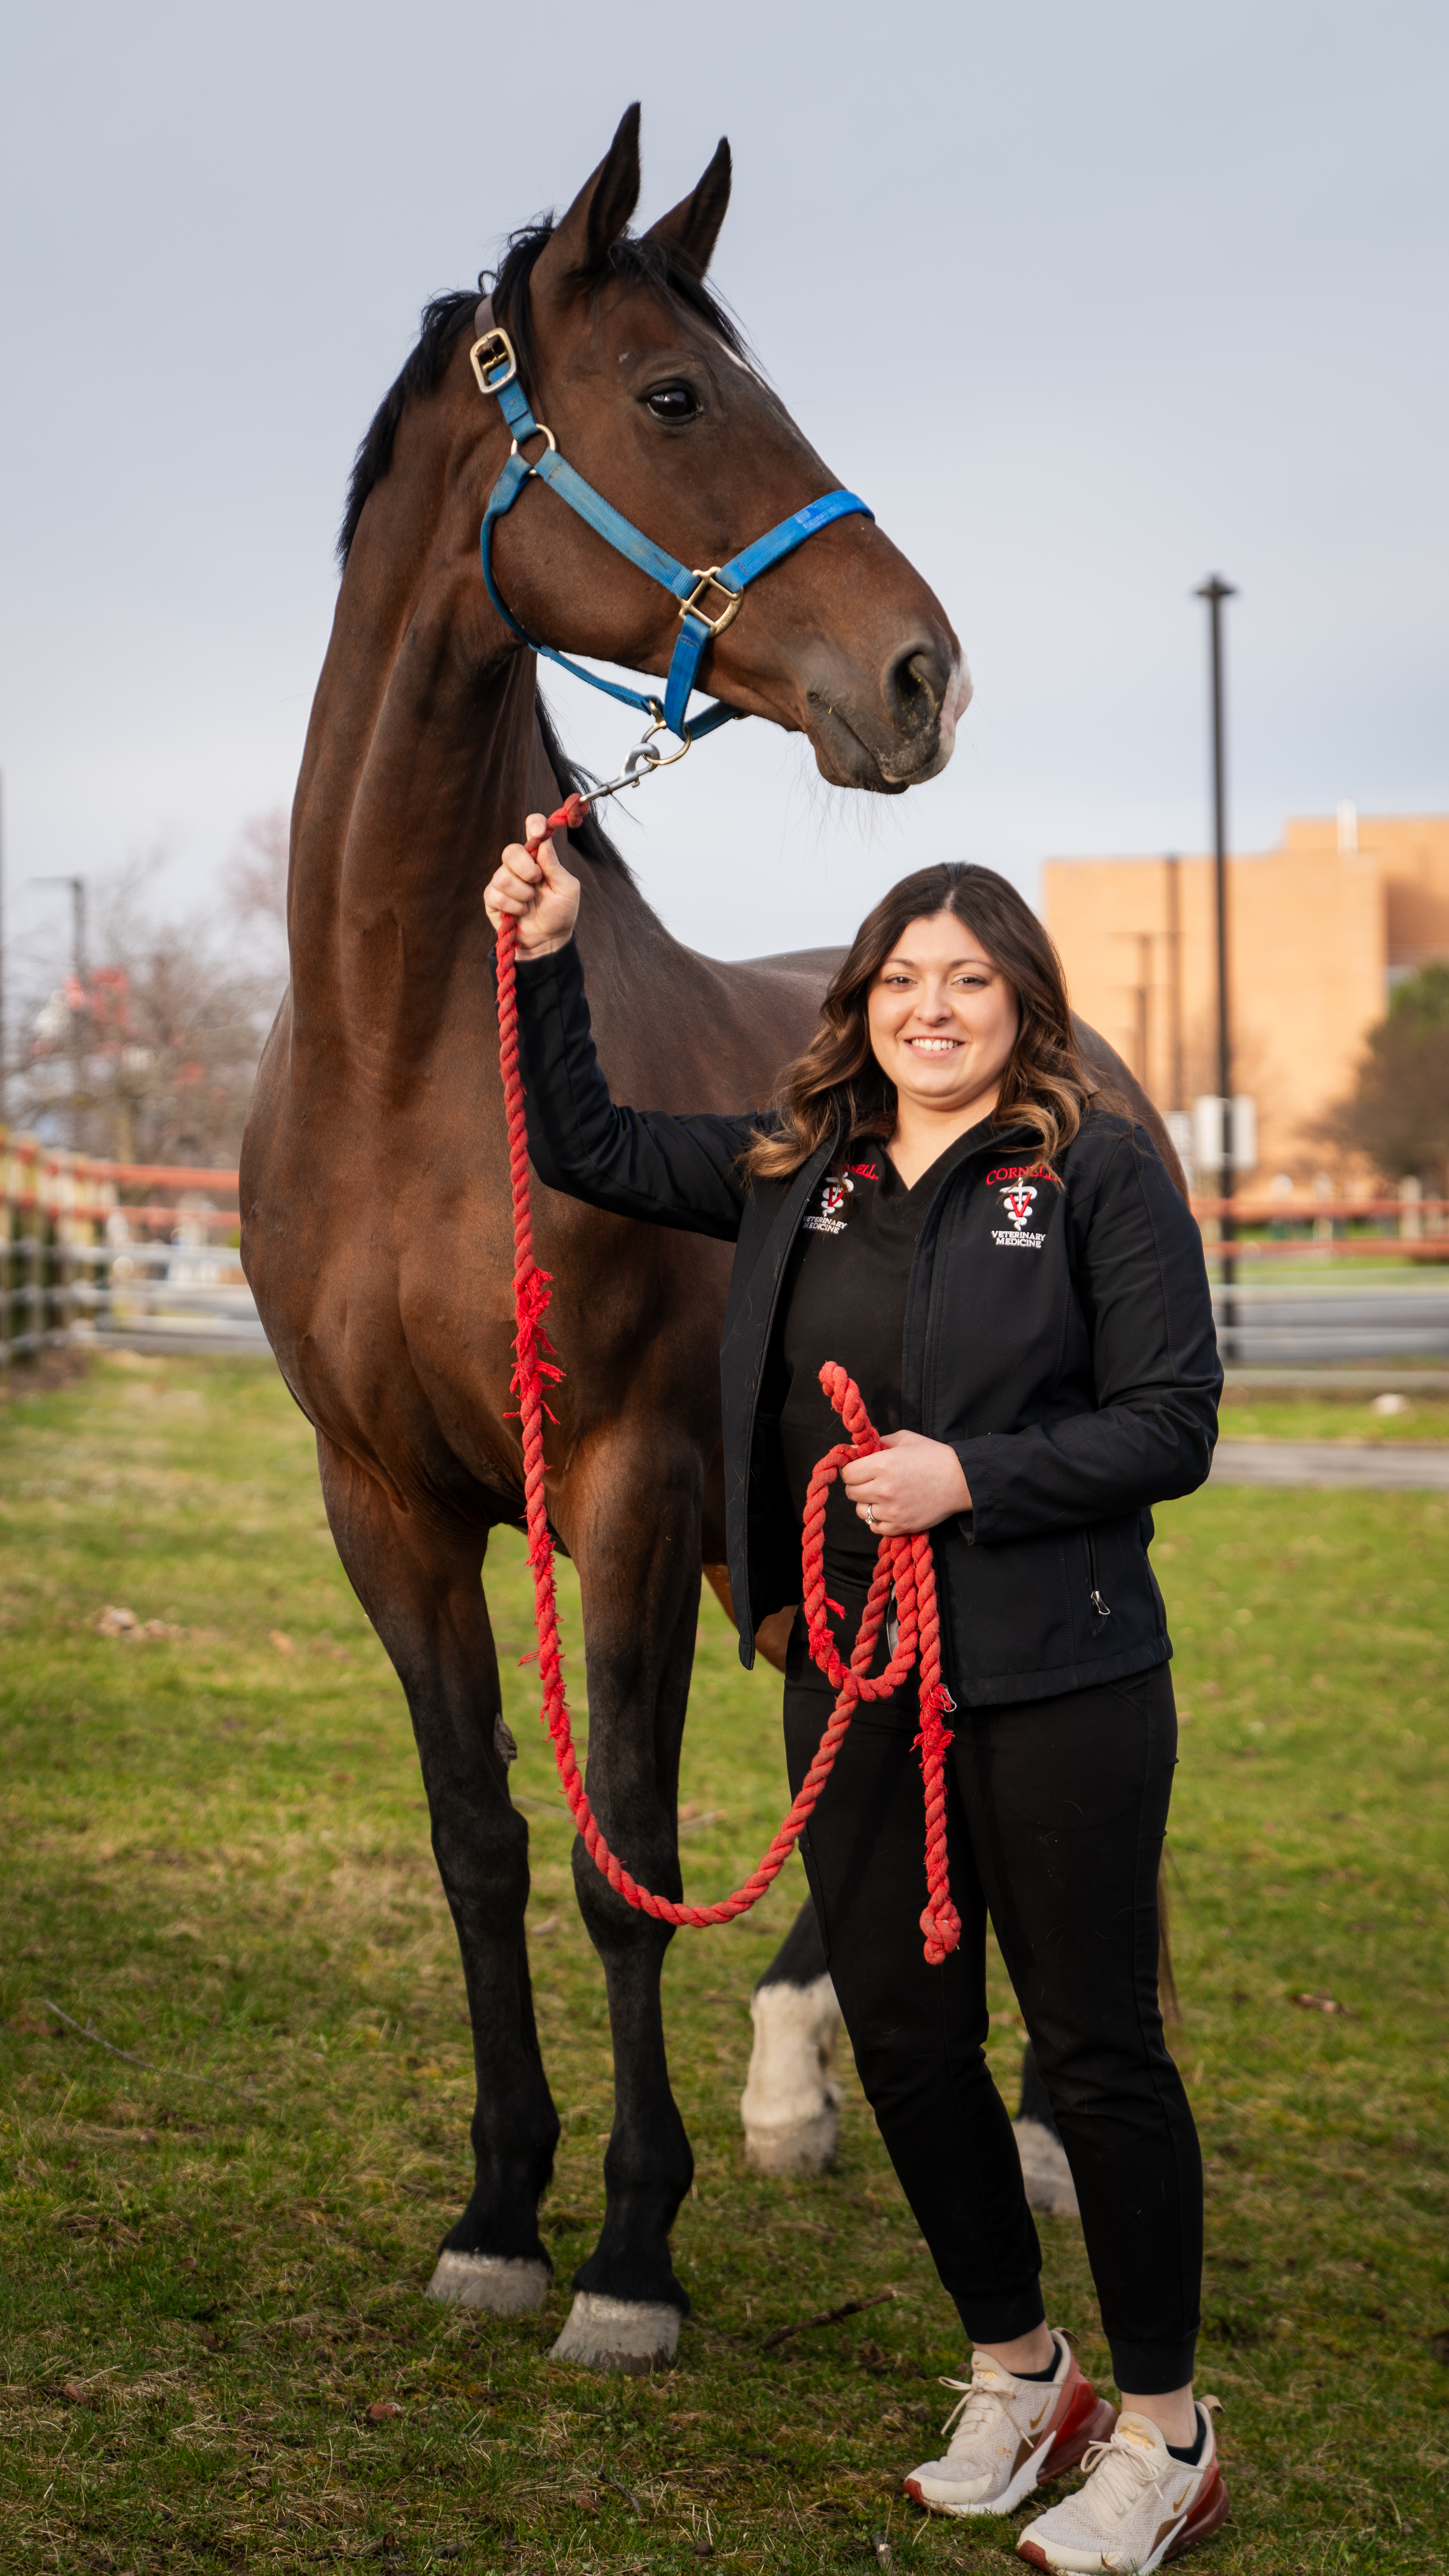 Mikaela with tall horse posing outdoors